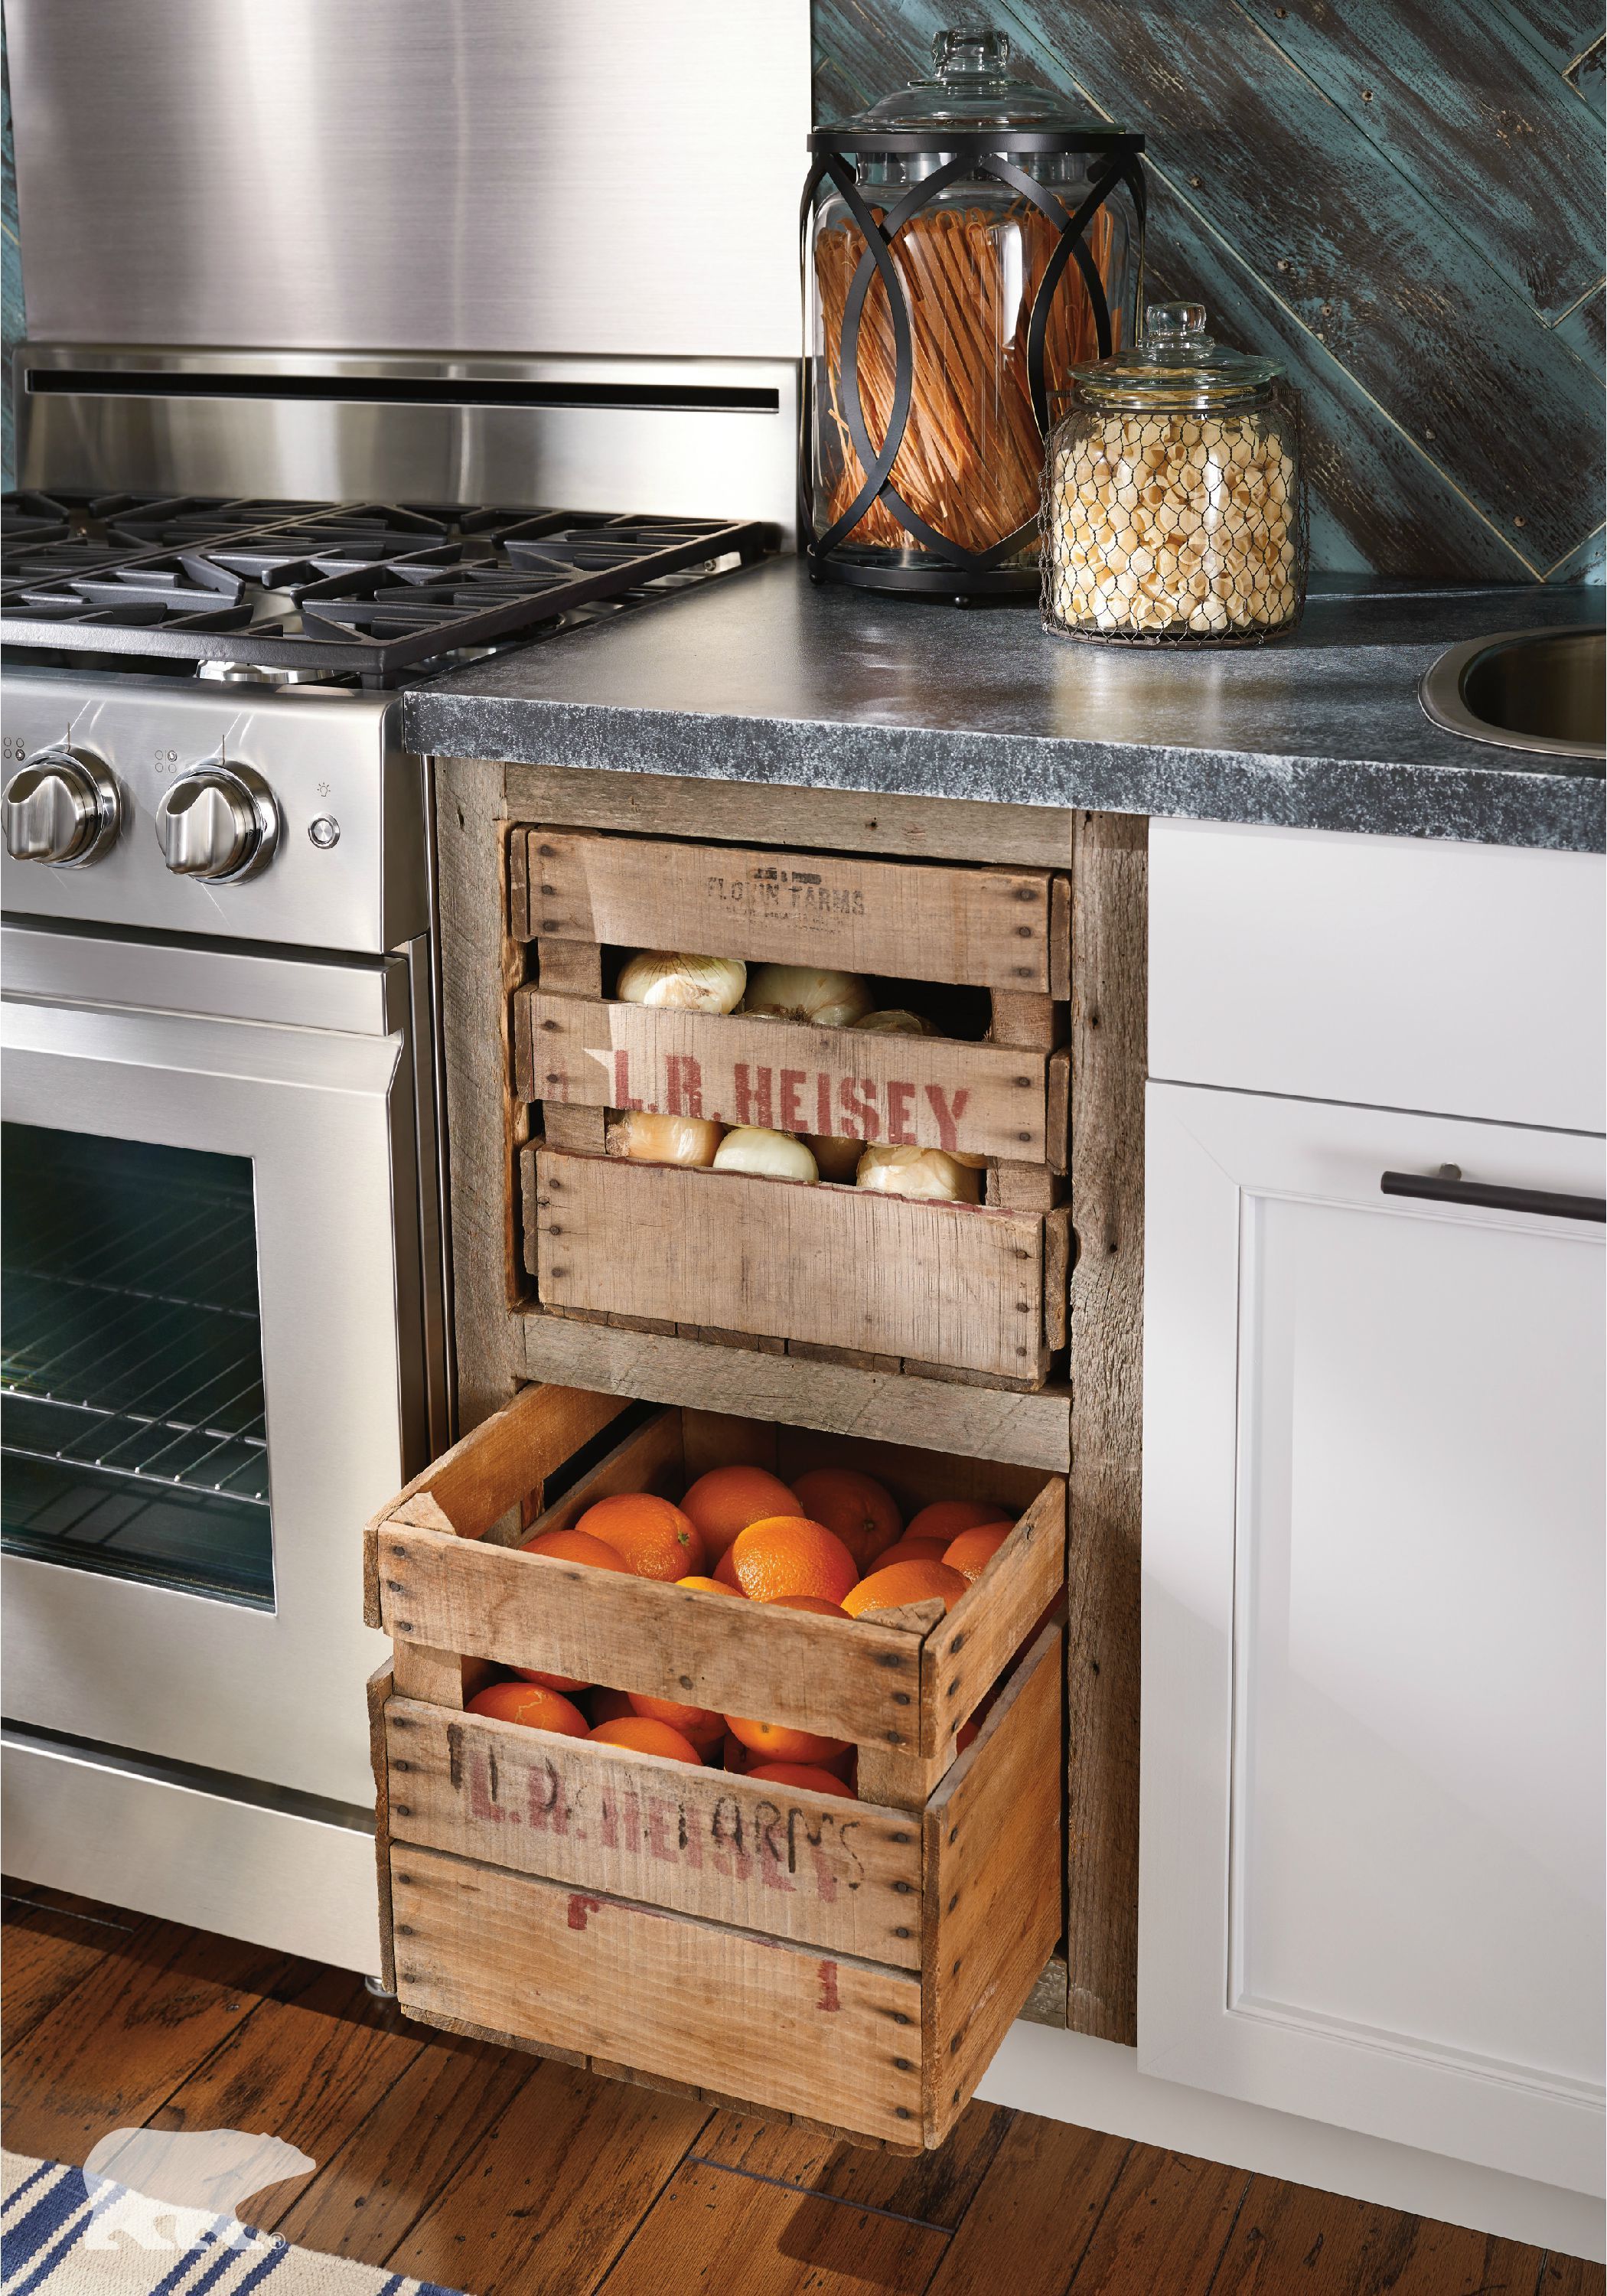 Remodeling your kitchen and want a farmhouse look? Use a washed-out technique on the wood backsplash and the wood crates you hold